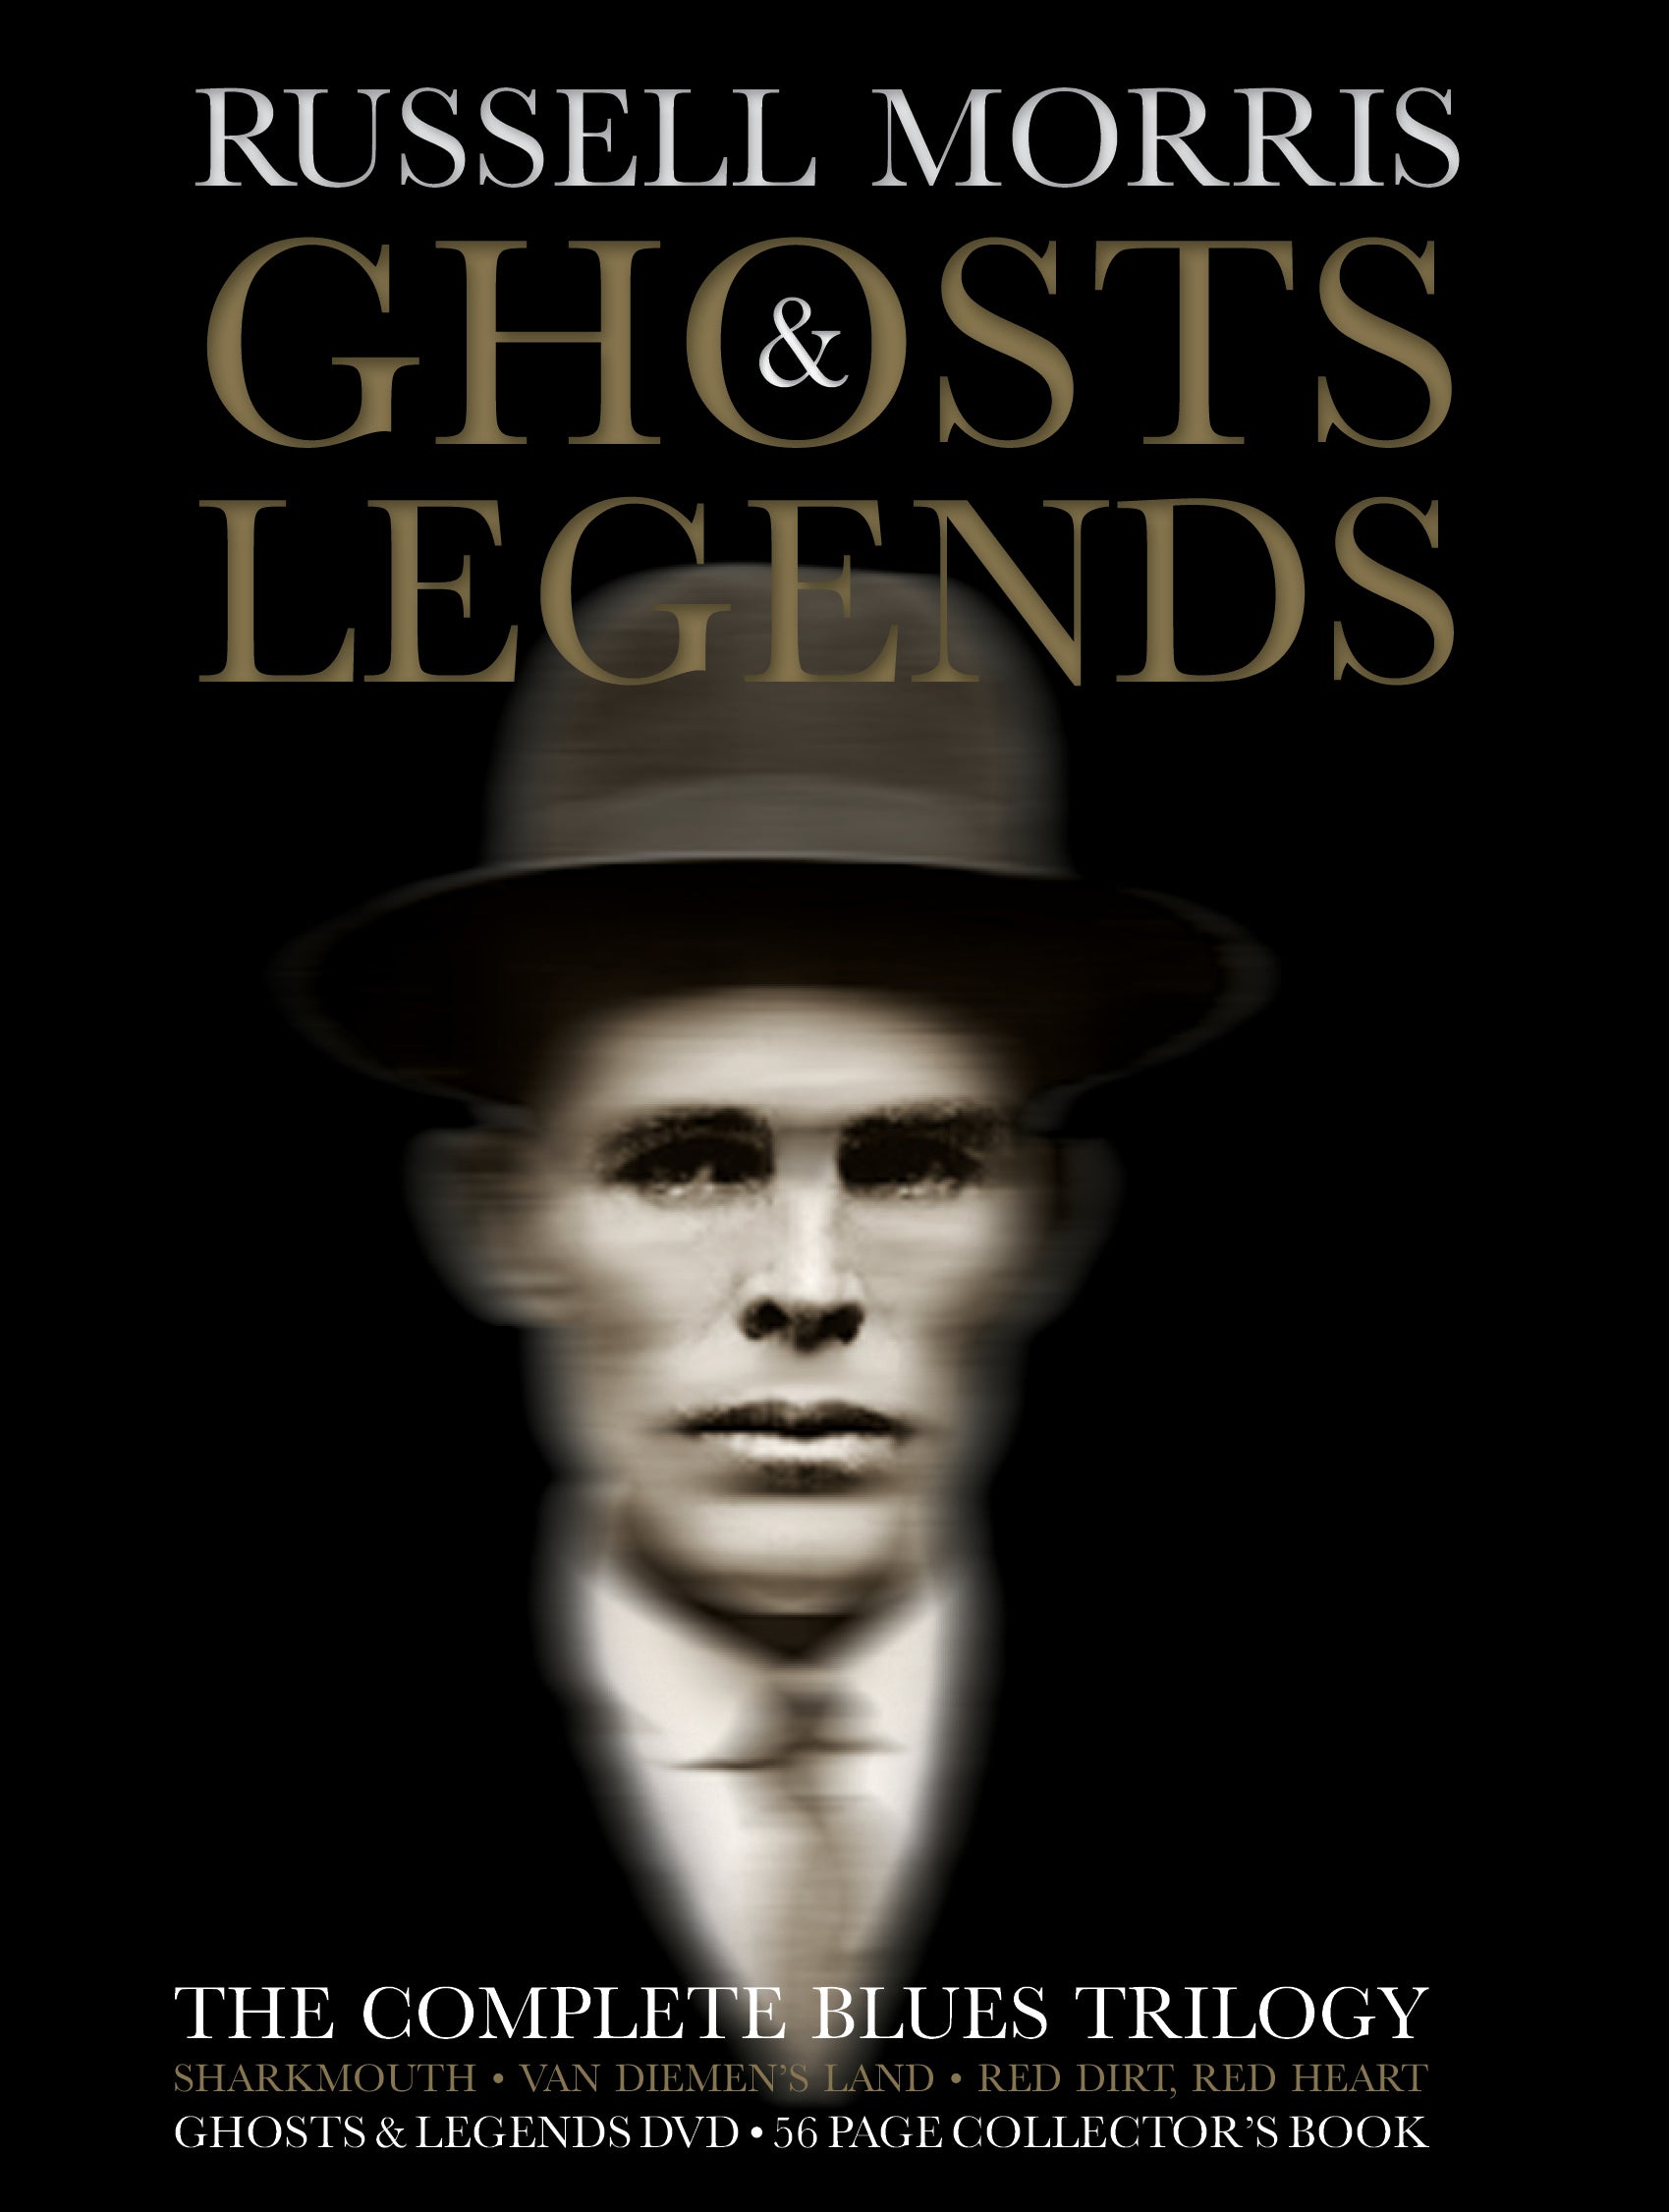 RUSSELL MORRIS - GHOSTS & LEGENDS (DELUXE BOXSET 3CD + 1DVD)